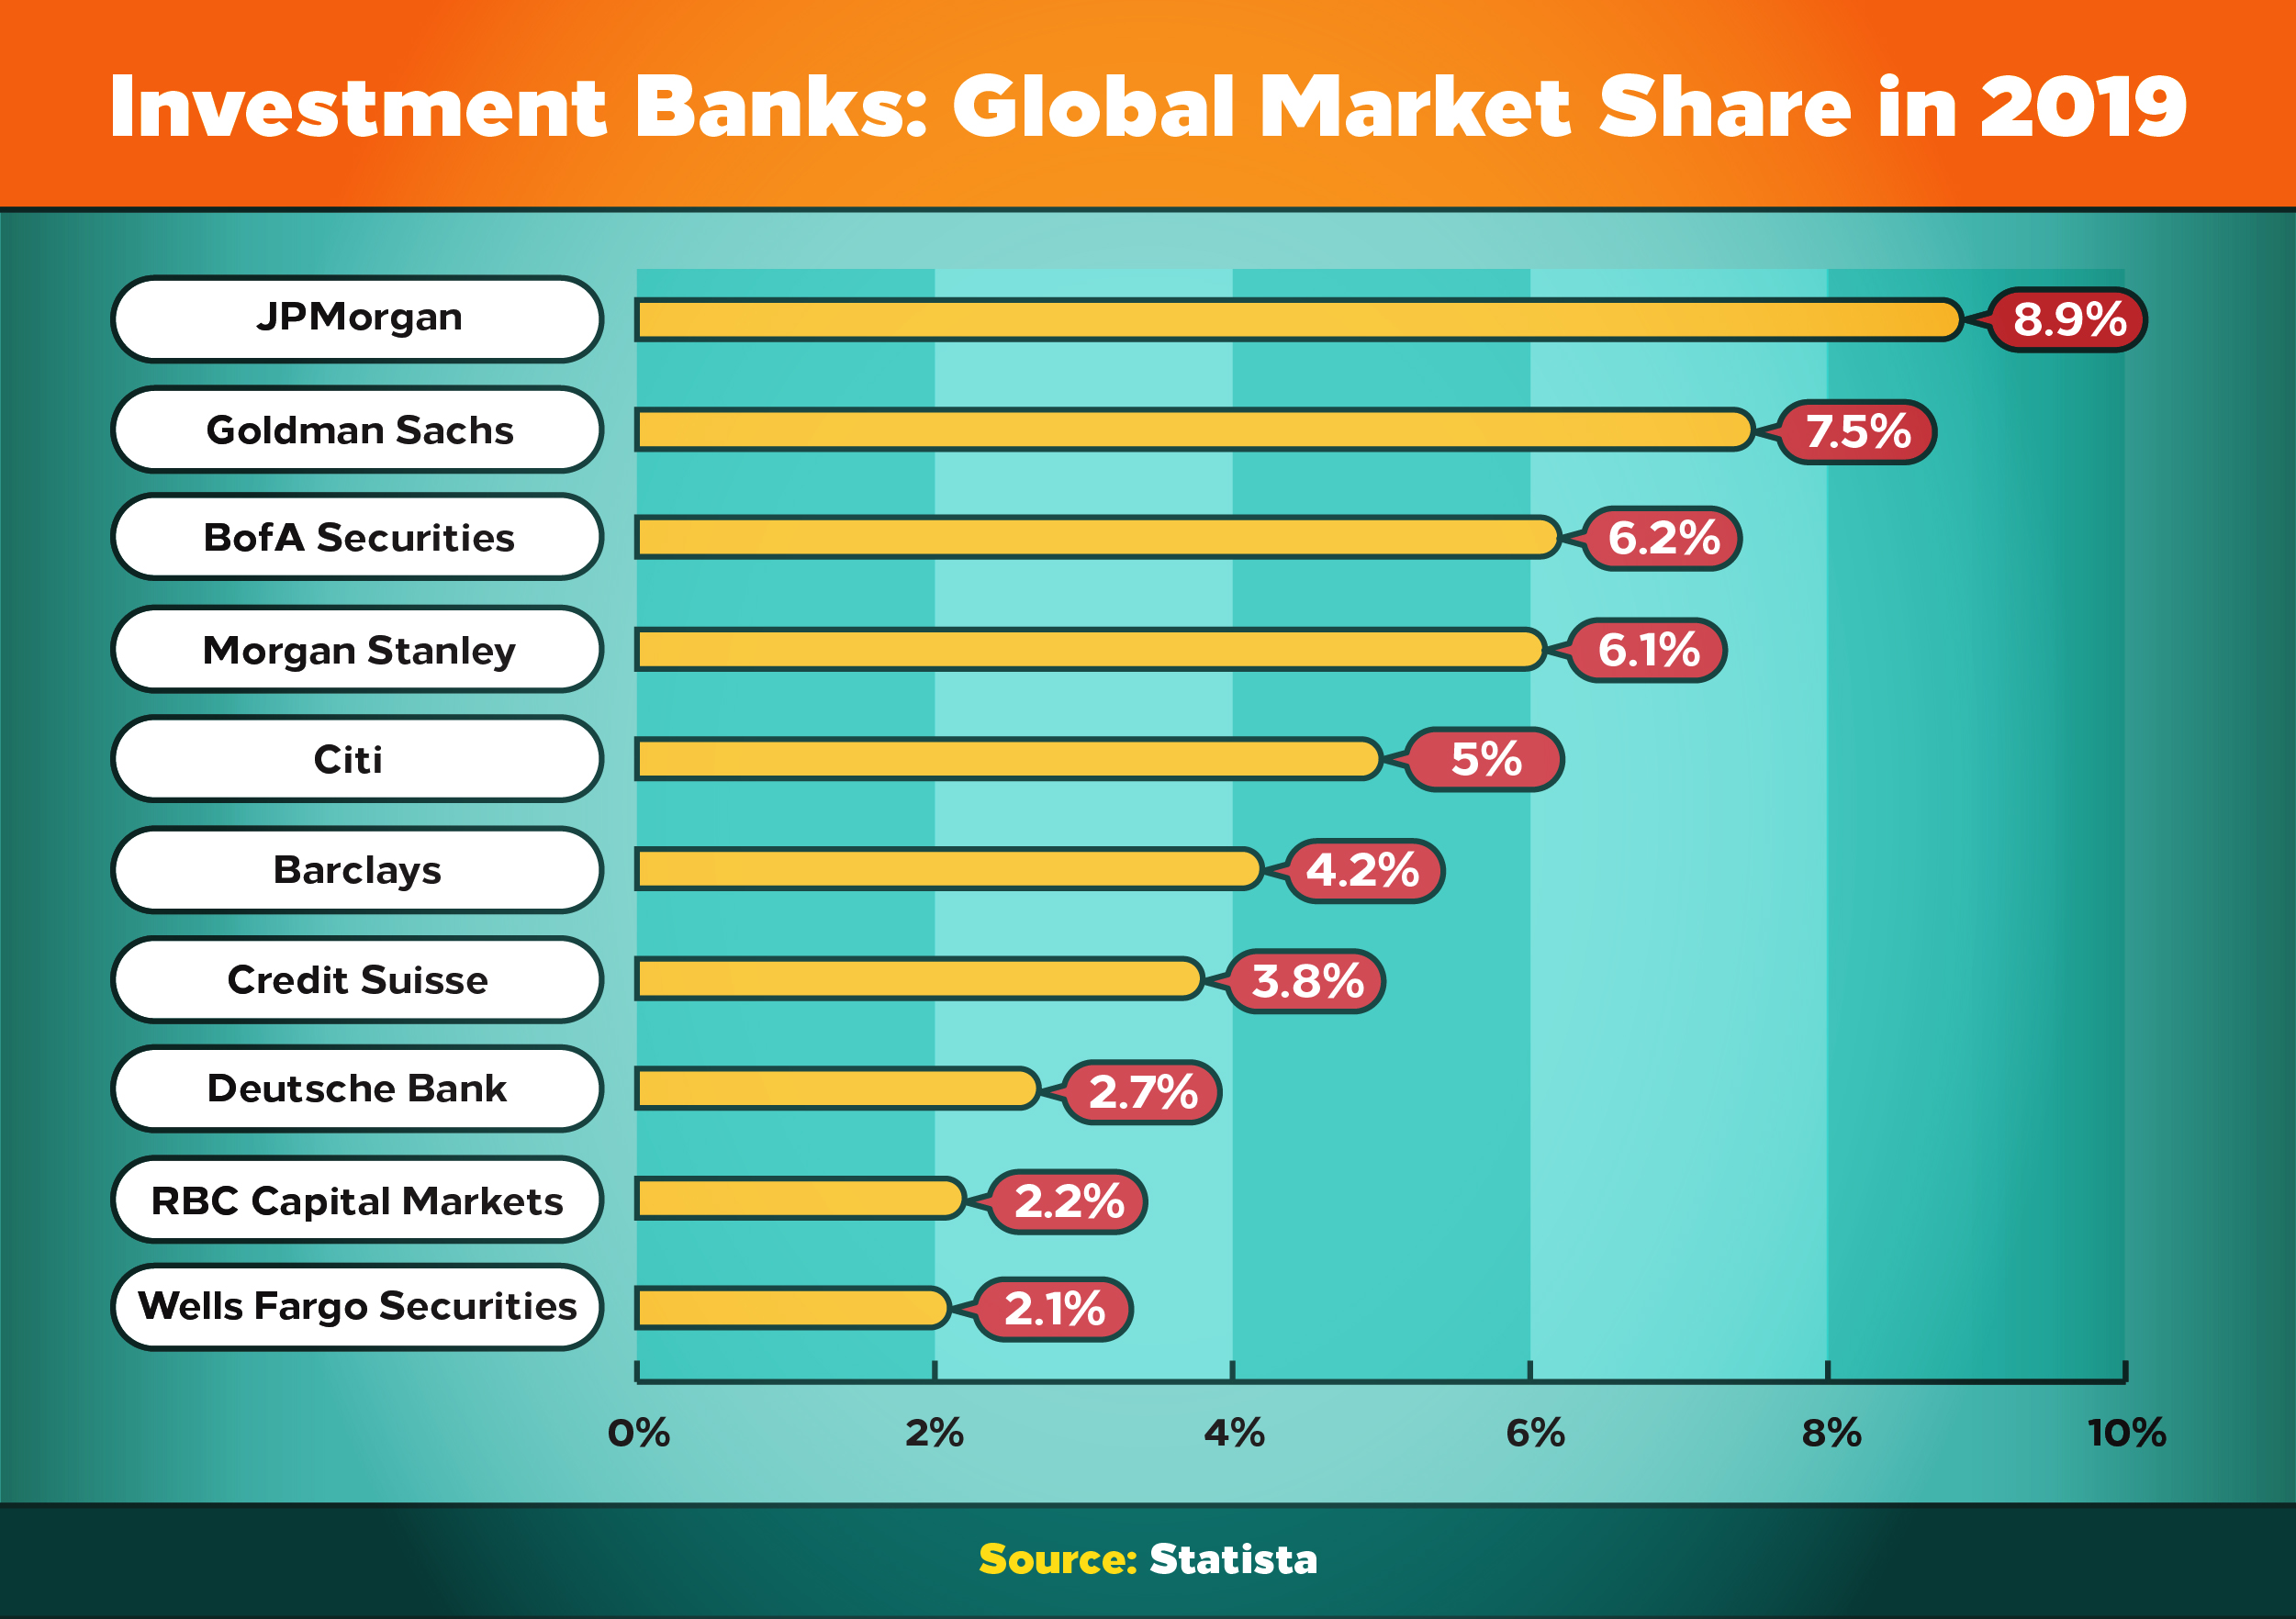 The largest investment banks by global market share include JPMorgan, Goldman Sachs, BofA, and Morgan Stanley.